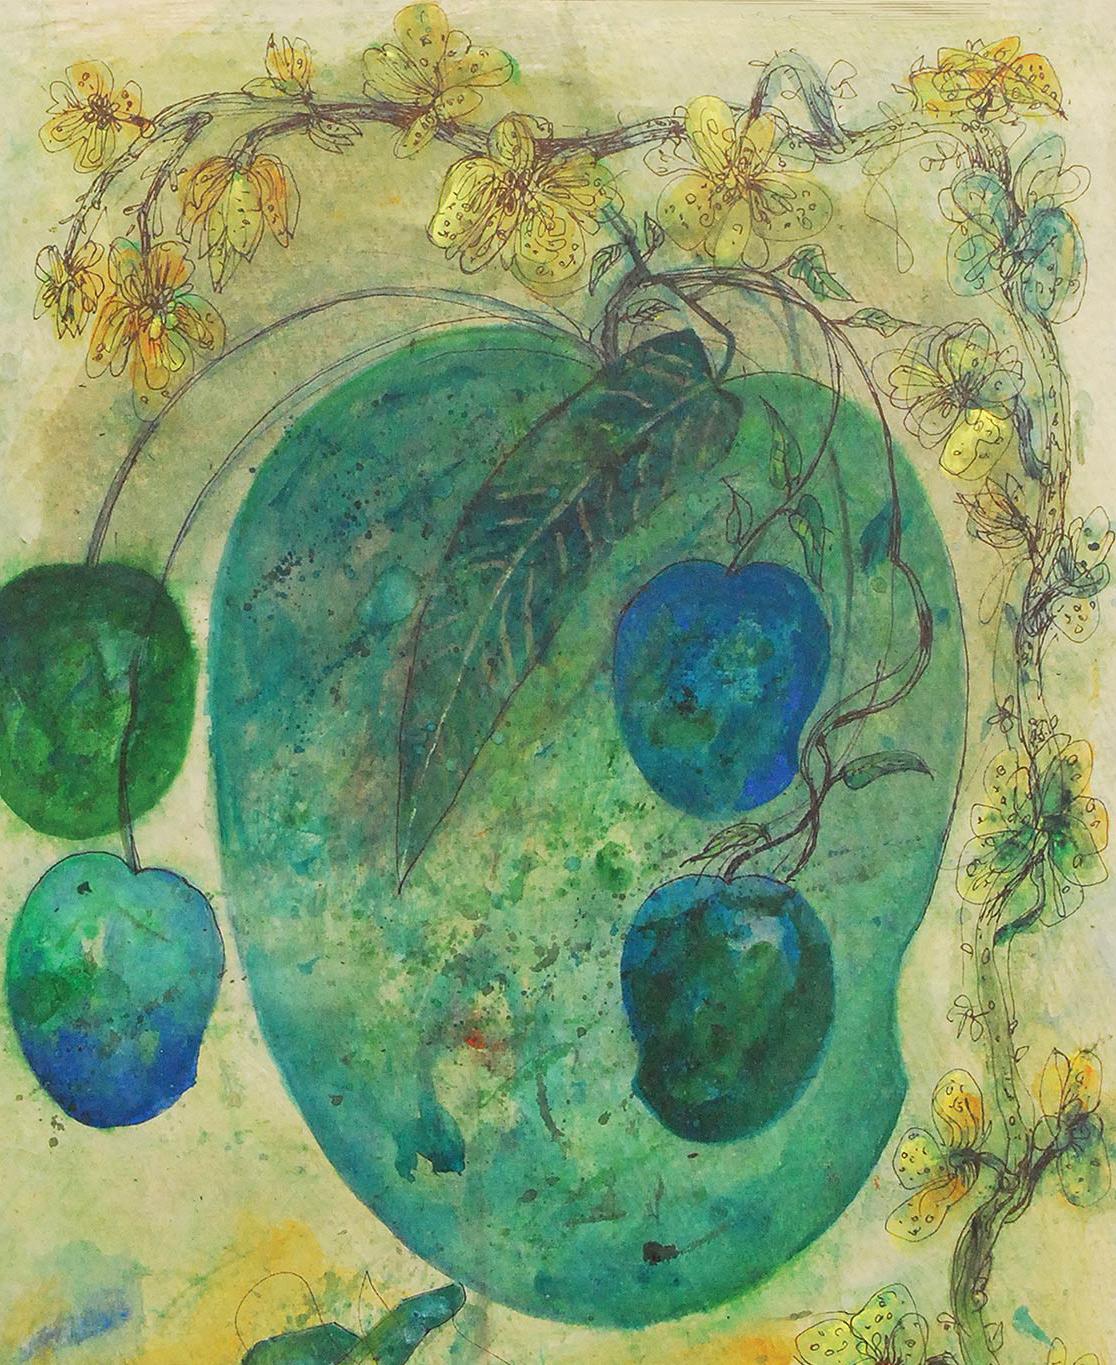 Mangoes, Mixed Media on Paper, Green, Blue, Yellow by Artist Sunil Das